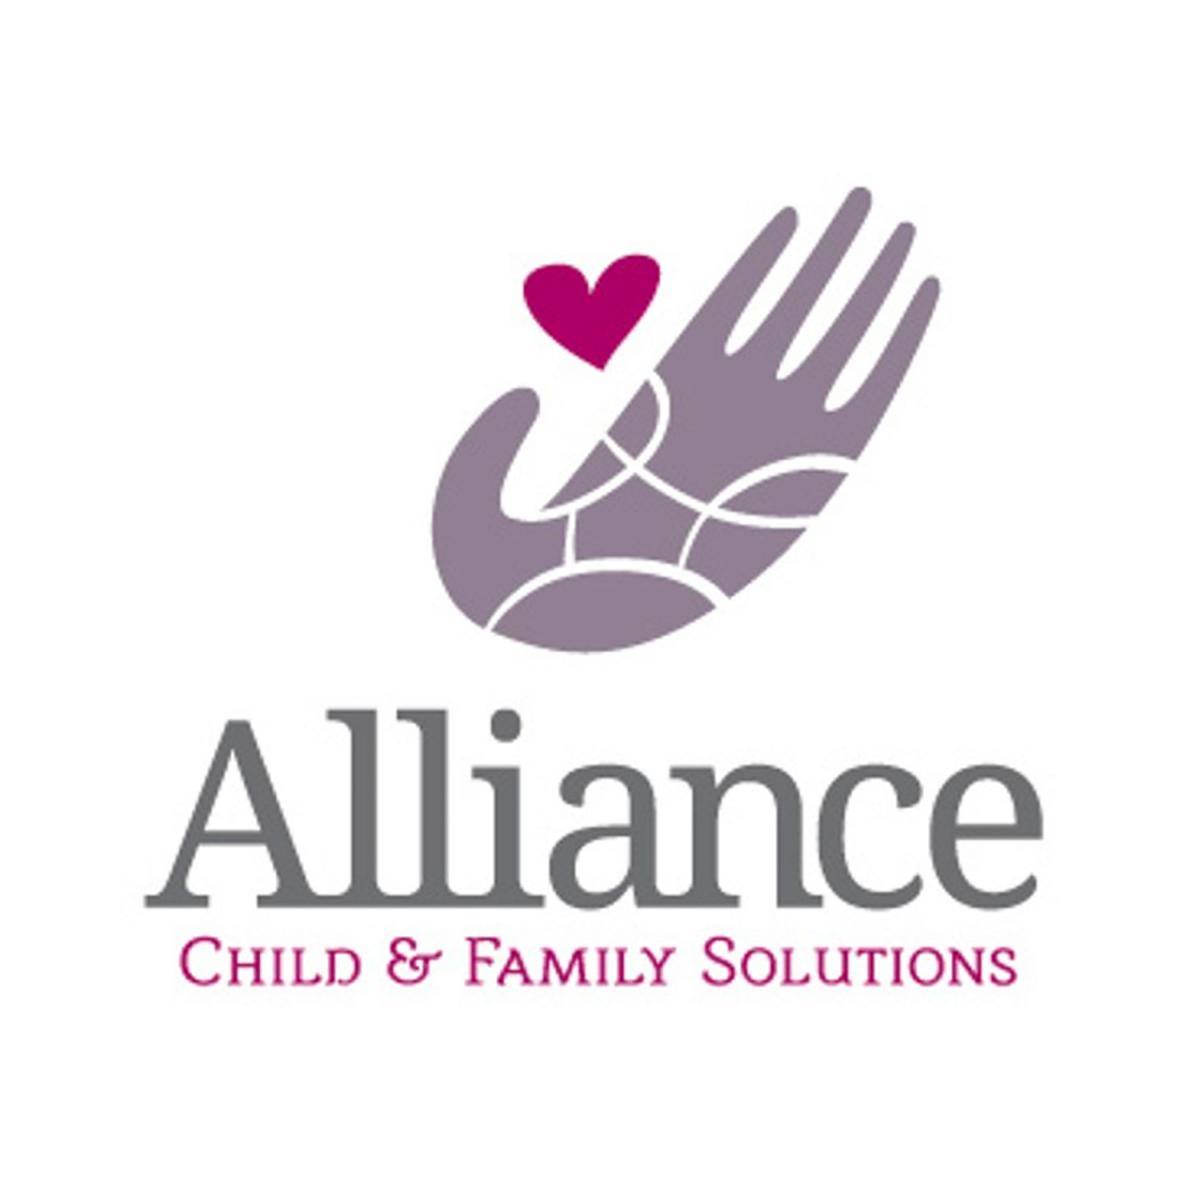 Alliance Chid & Family Solutions